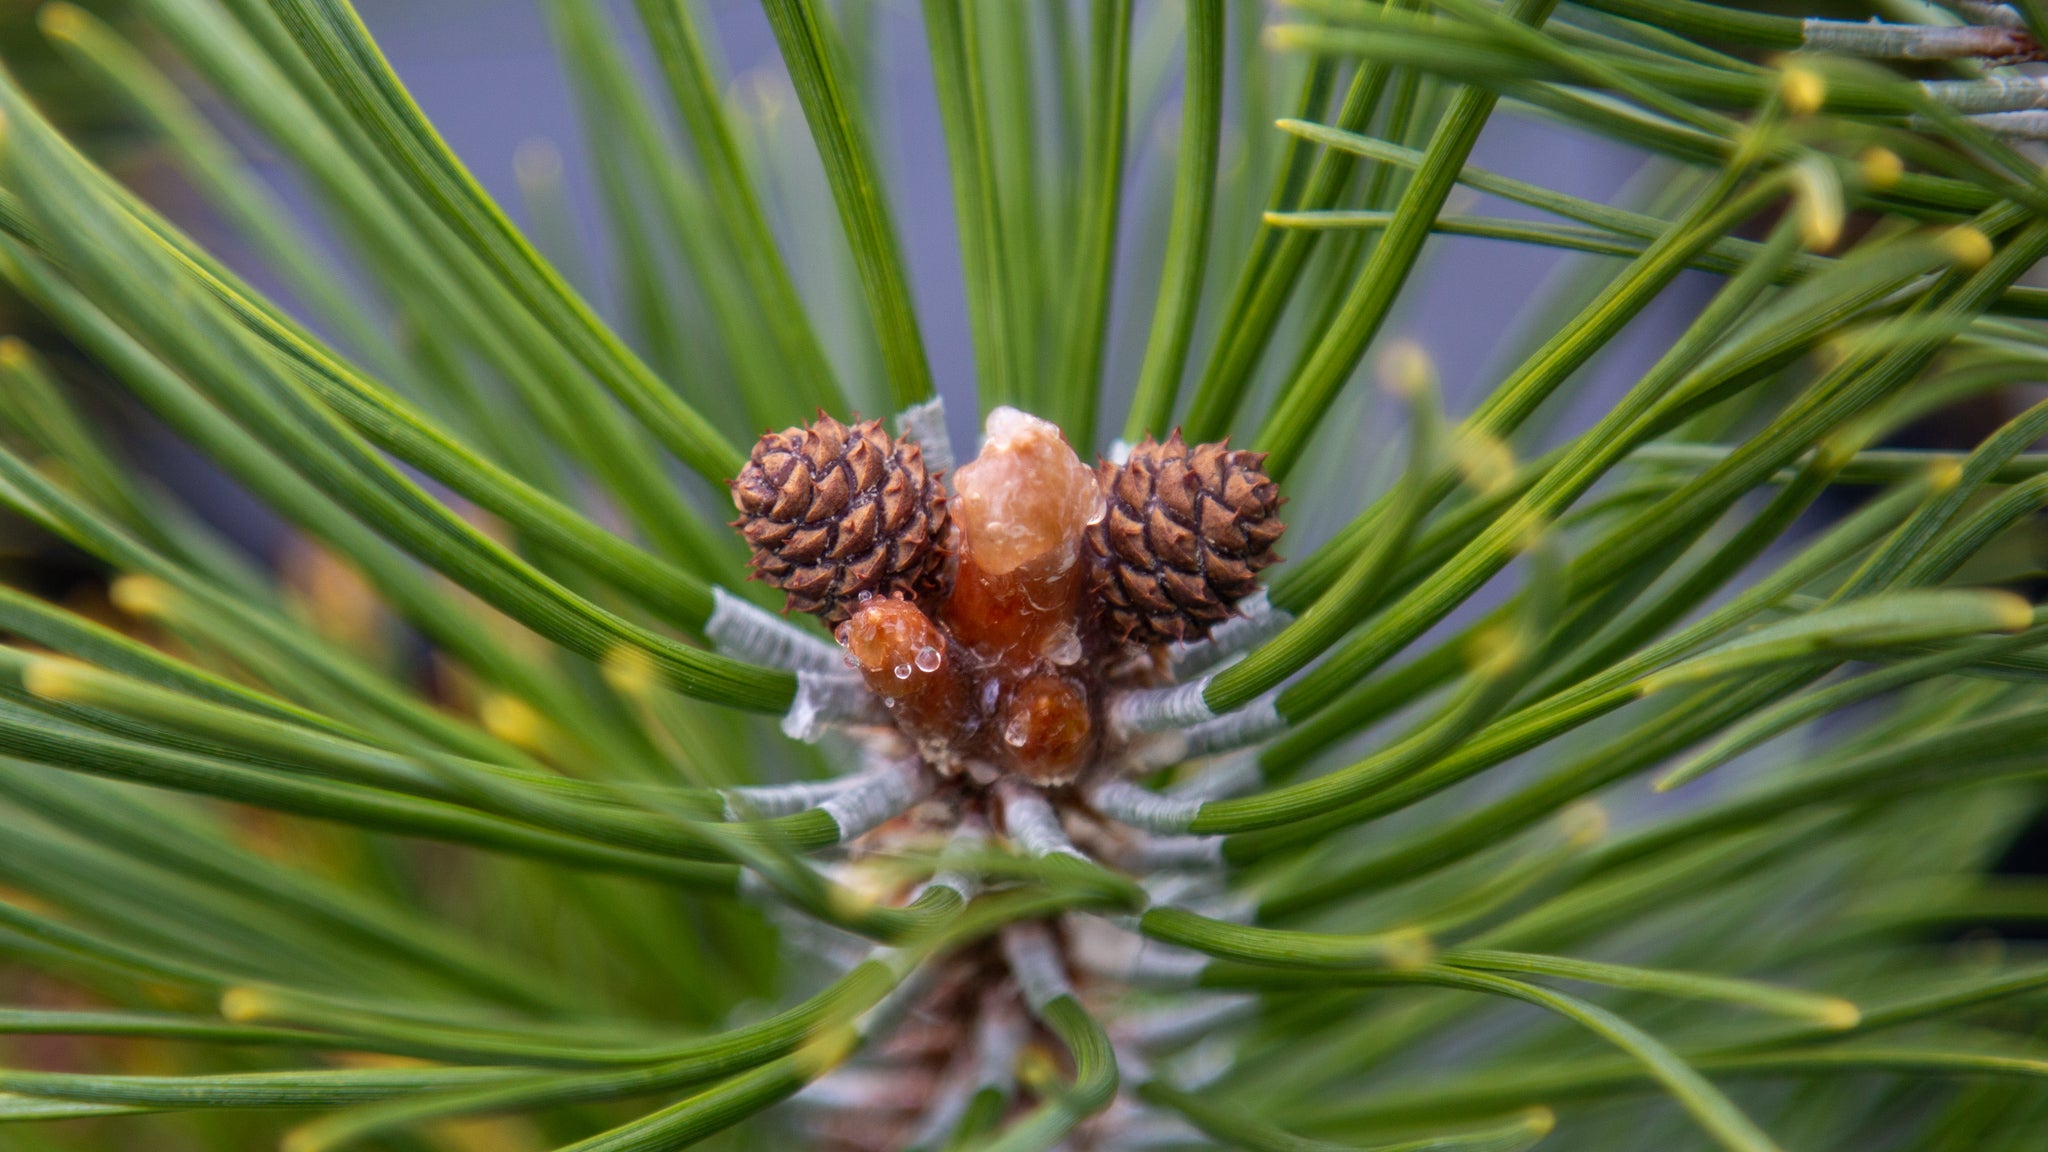 casey stinson recommends large pinus pics pic